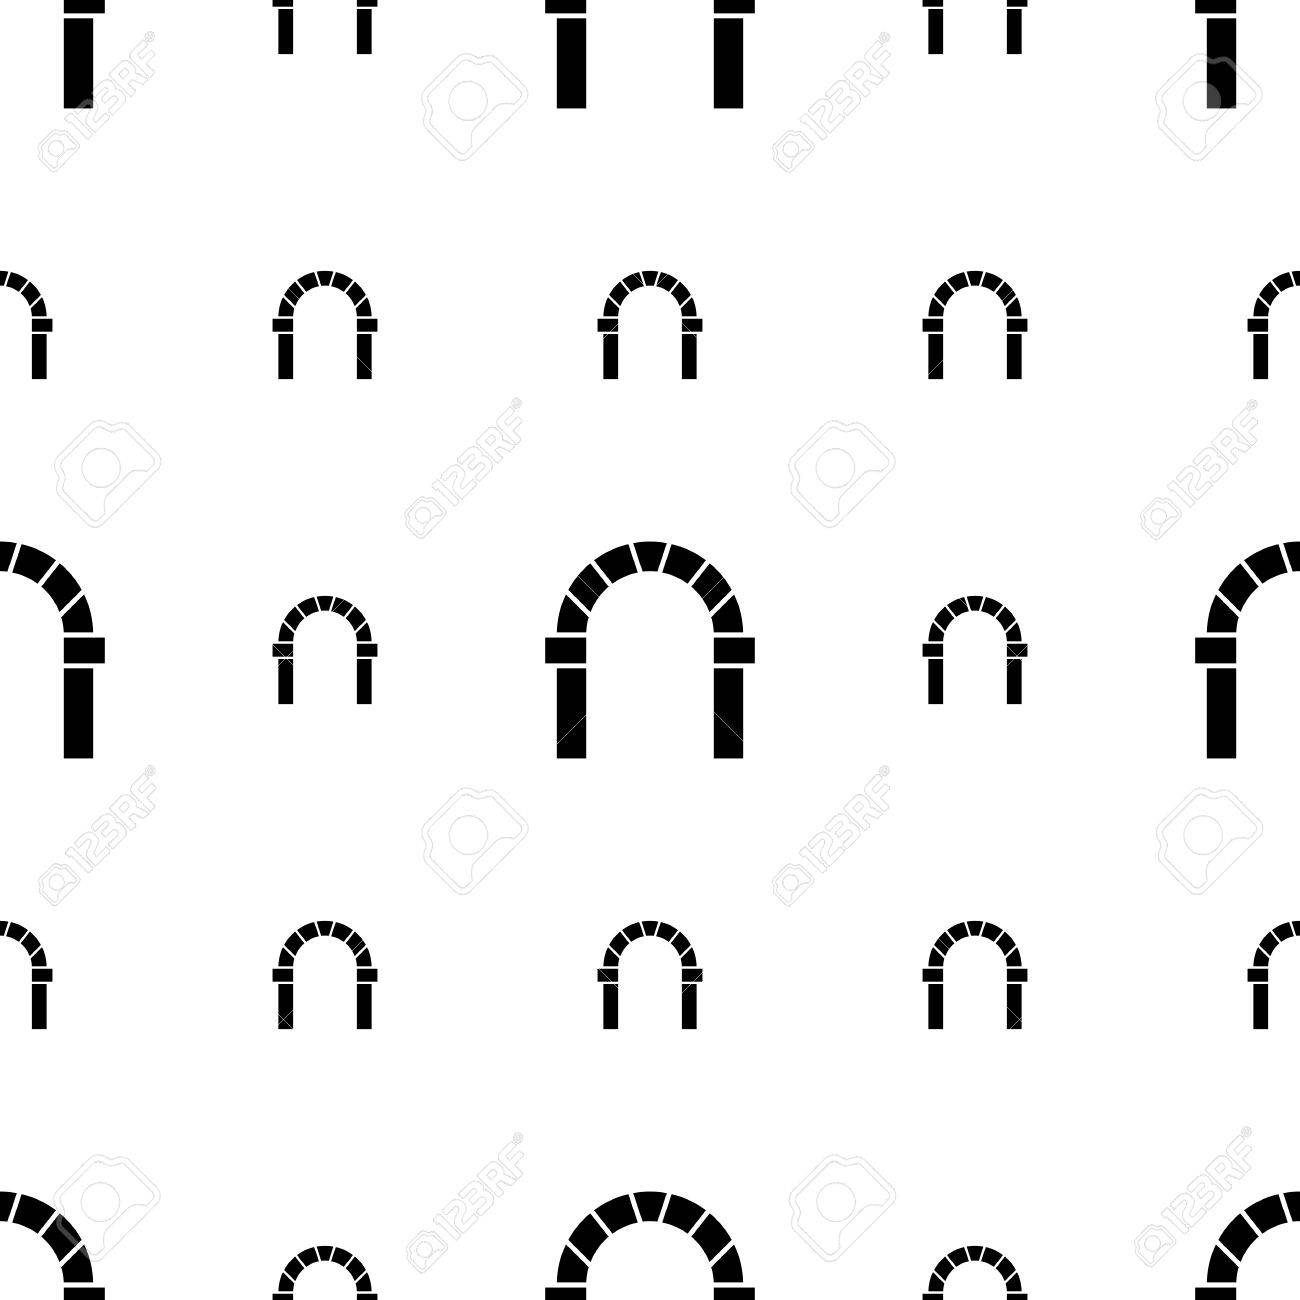 Seamless Vector Pattern For Round Arch With Keystone On White